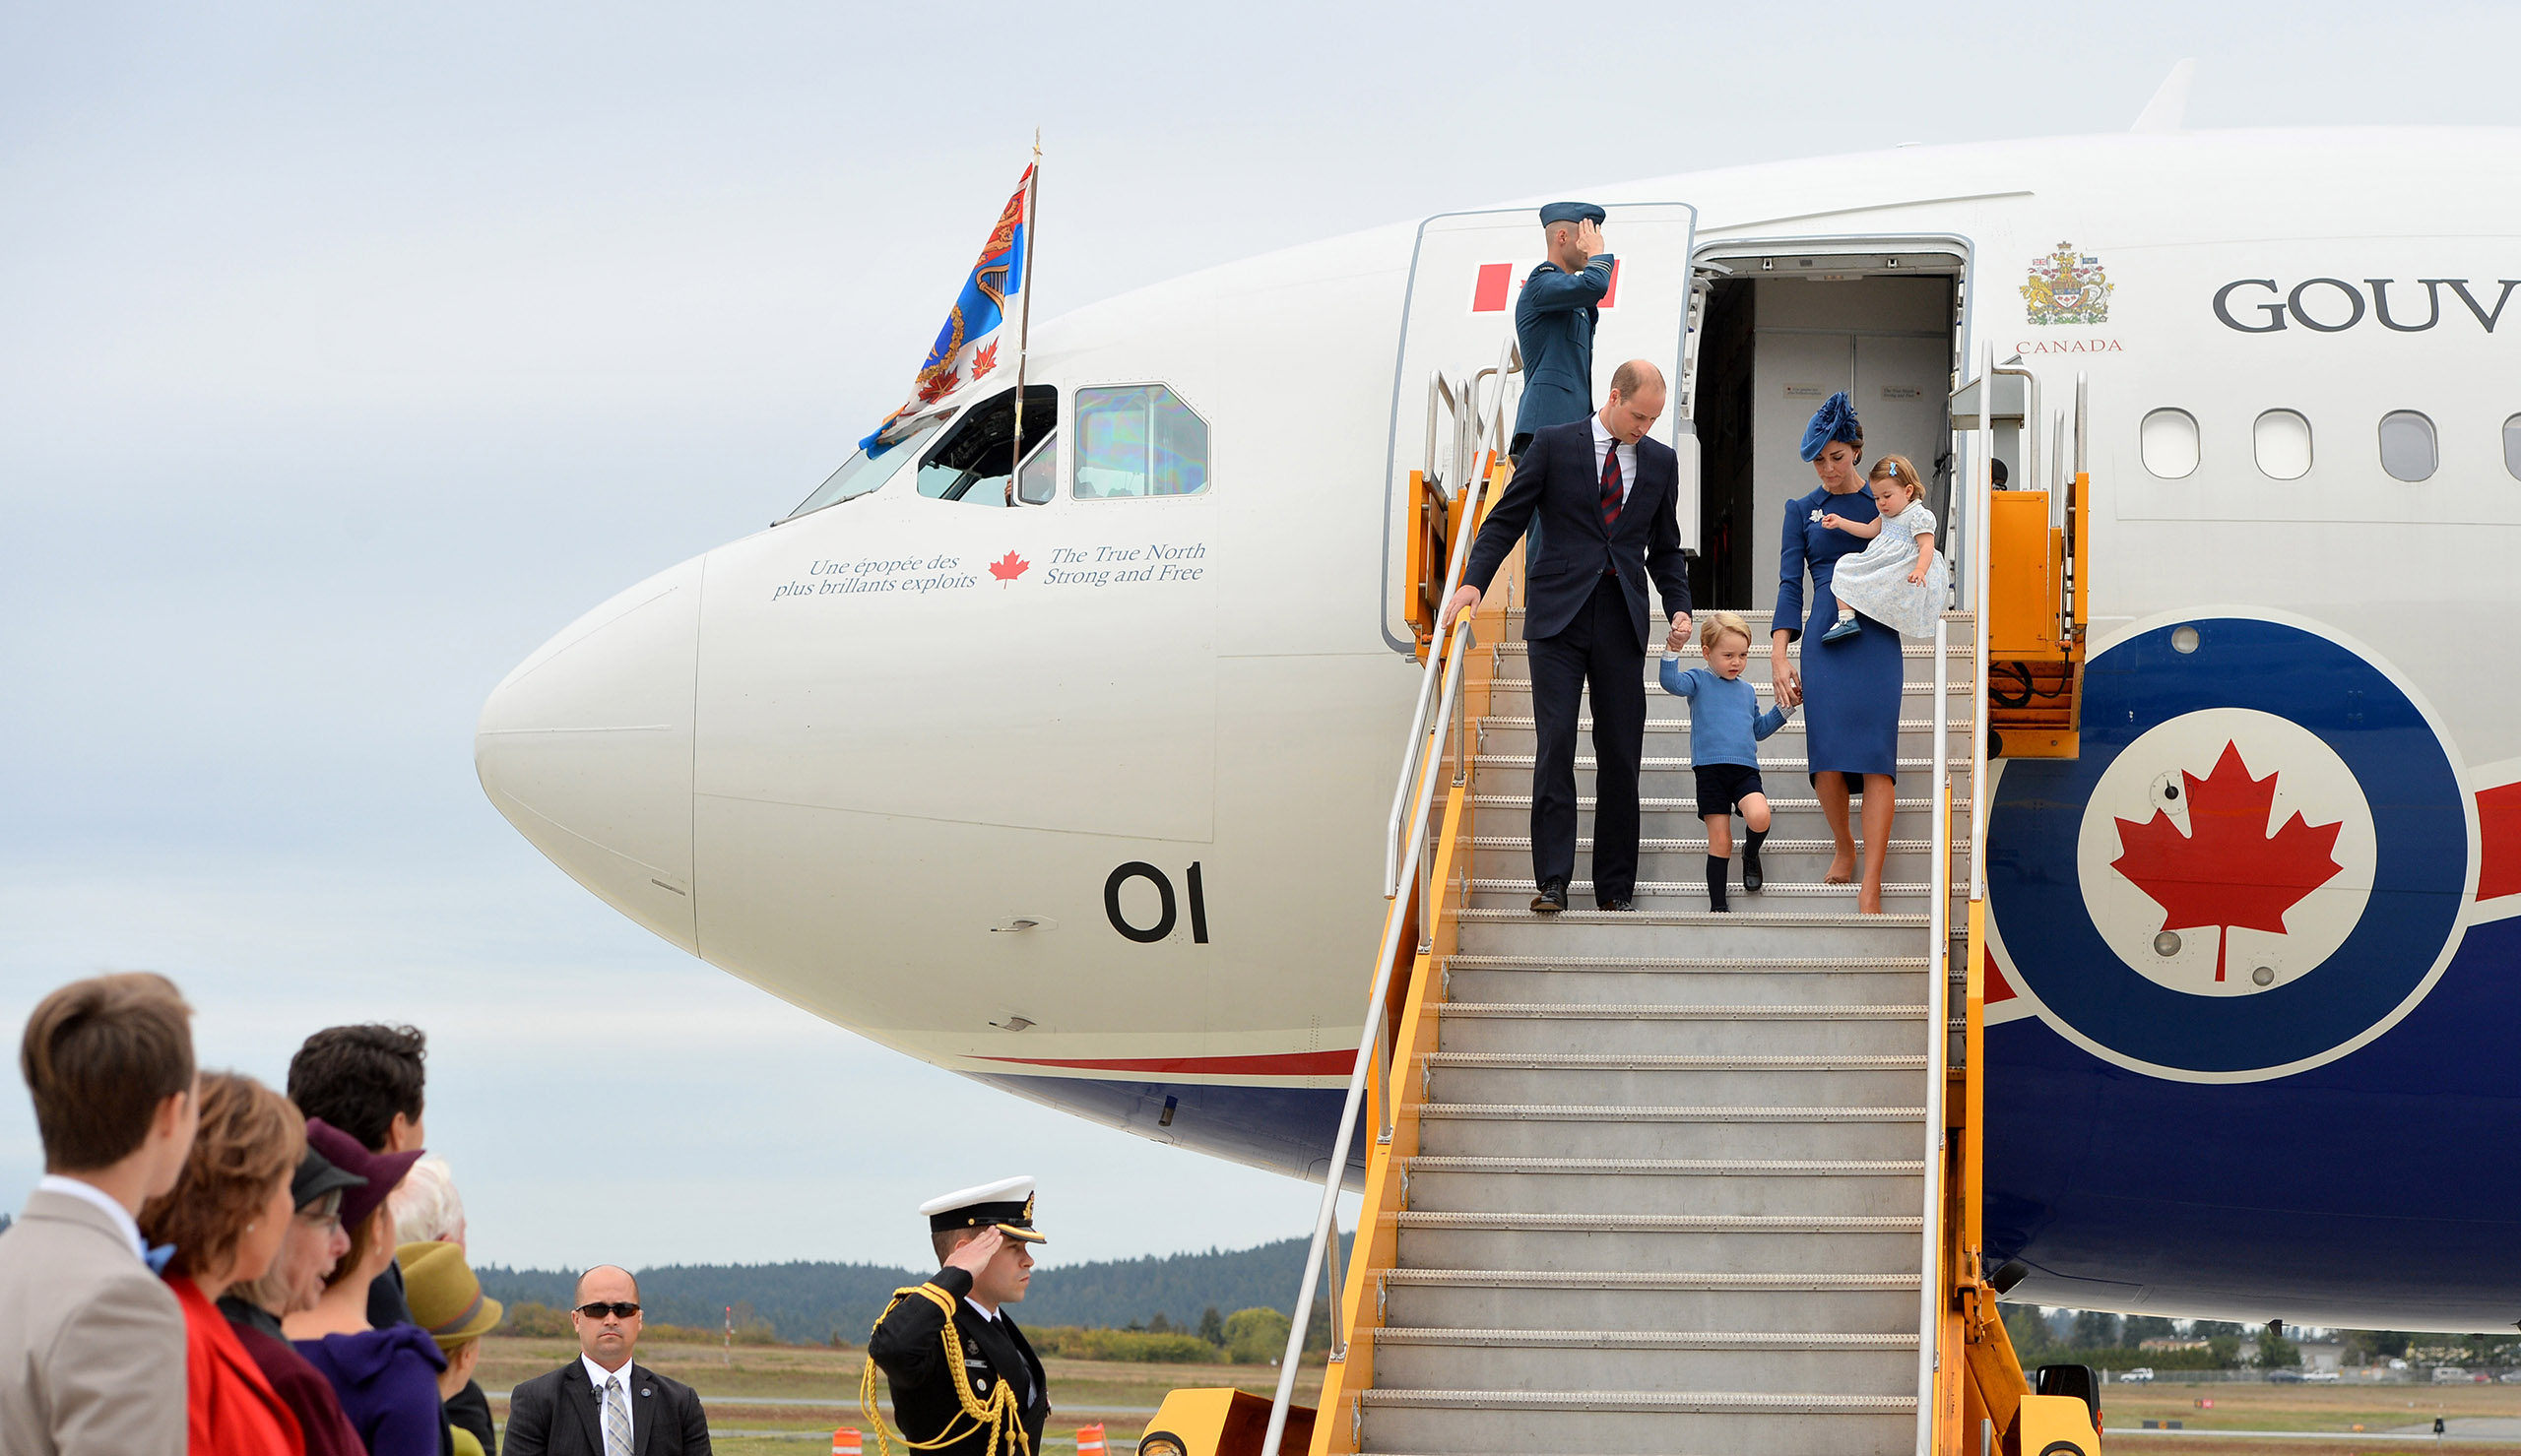 The Prime Minister of Canada Justin Trudeau and his wife Sophie, watch as Prince William, Duke of Cambridge, Catherine, Duchess of Cambridge, Prince George of Cambridge and Princess Charlotte of Cambridge arrive at Victoria International Airport on Sept. 24, 2016.